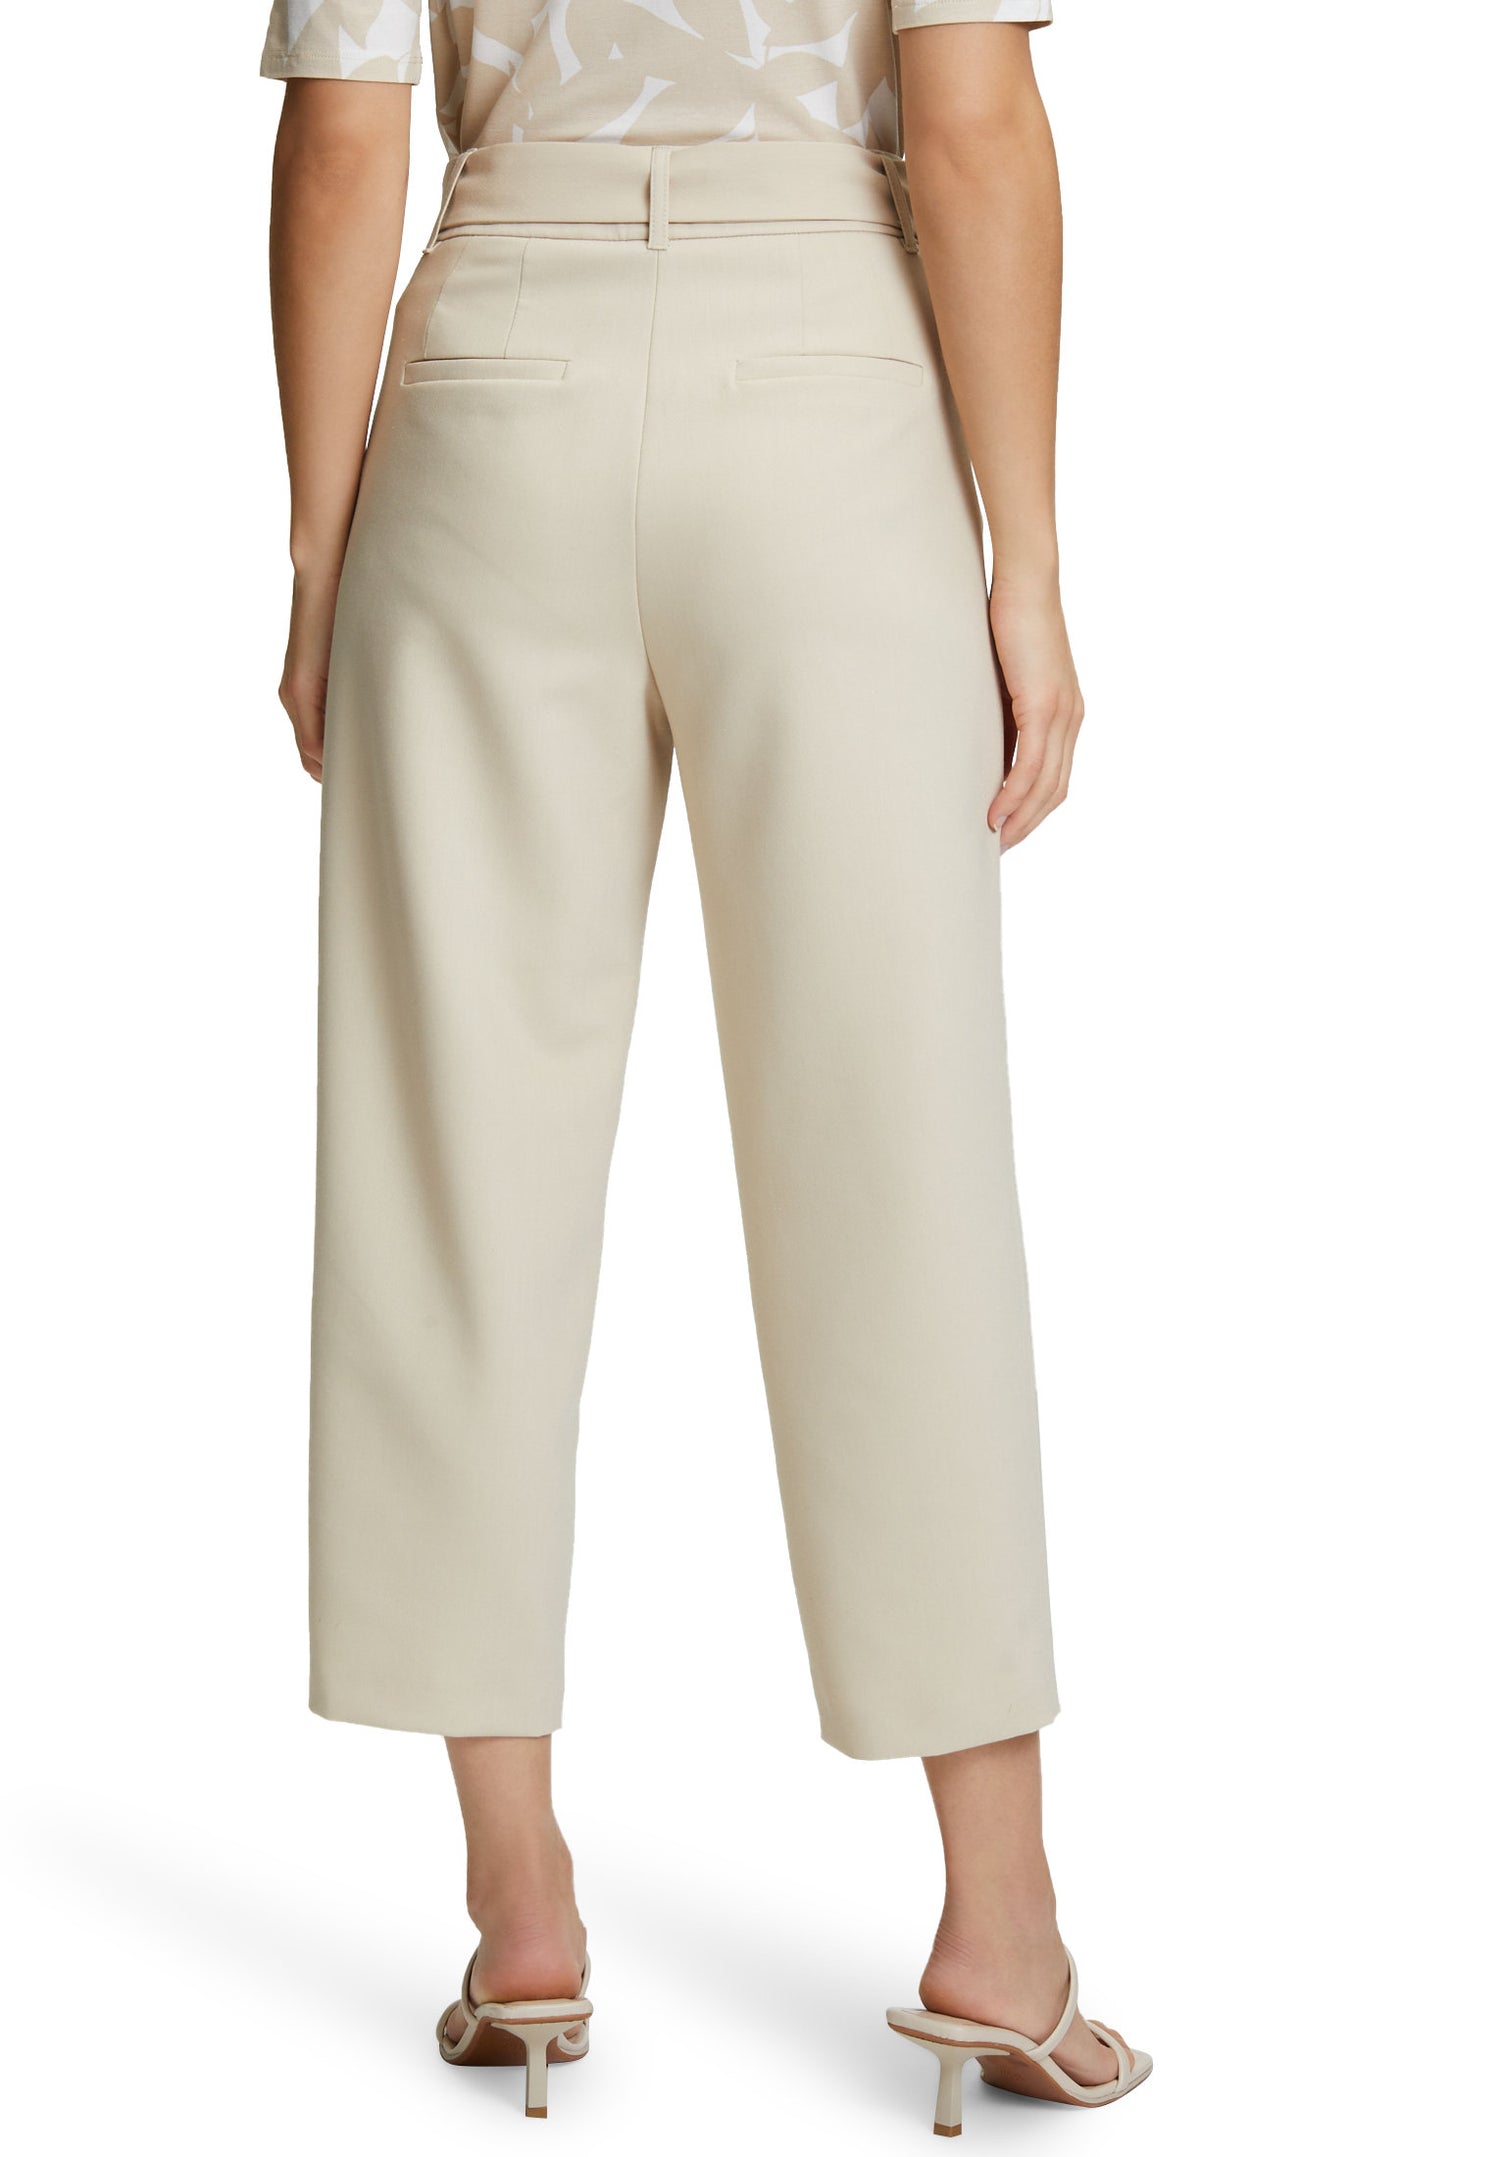 Cropped Dress Trousers With Belt_6895 2411_1166_04